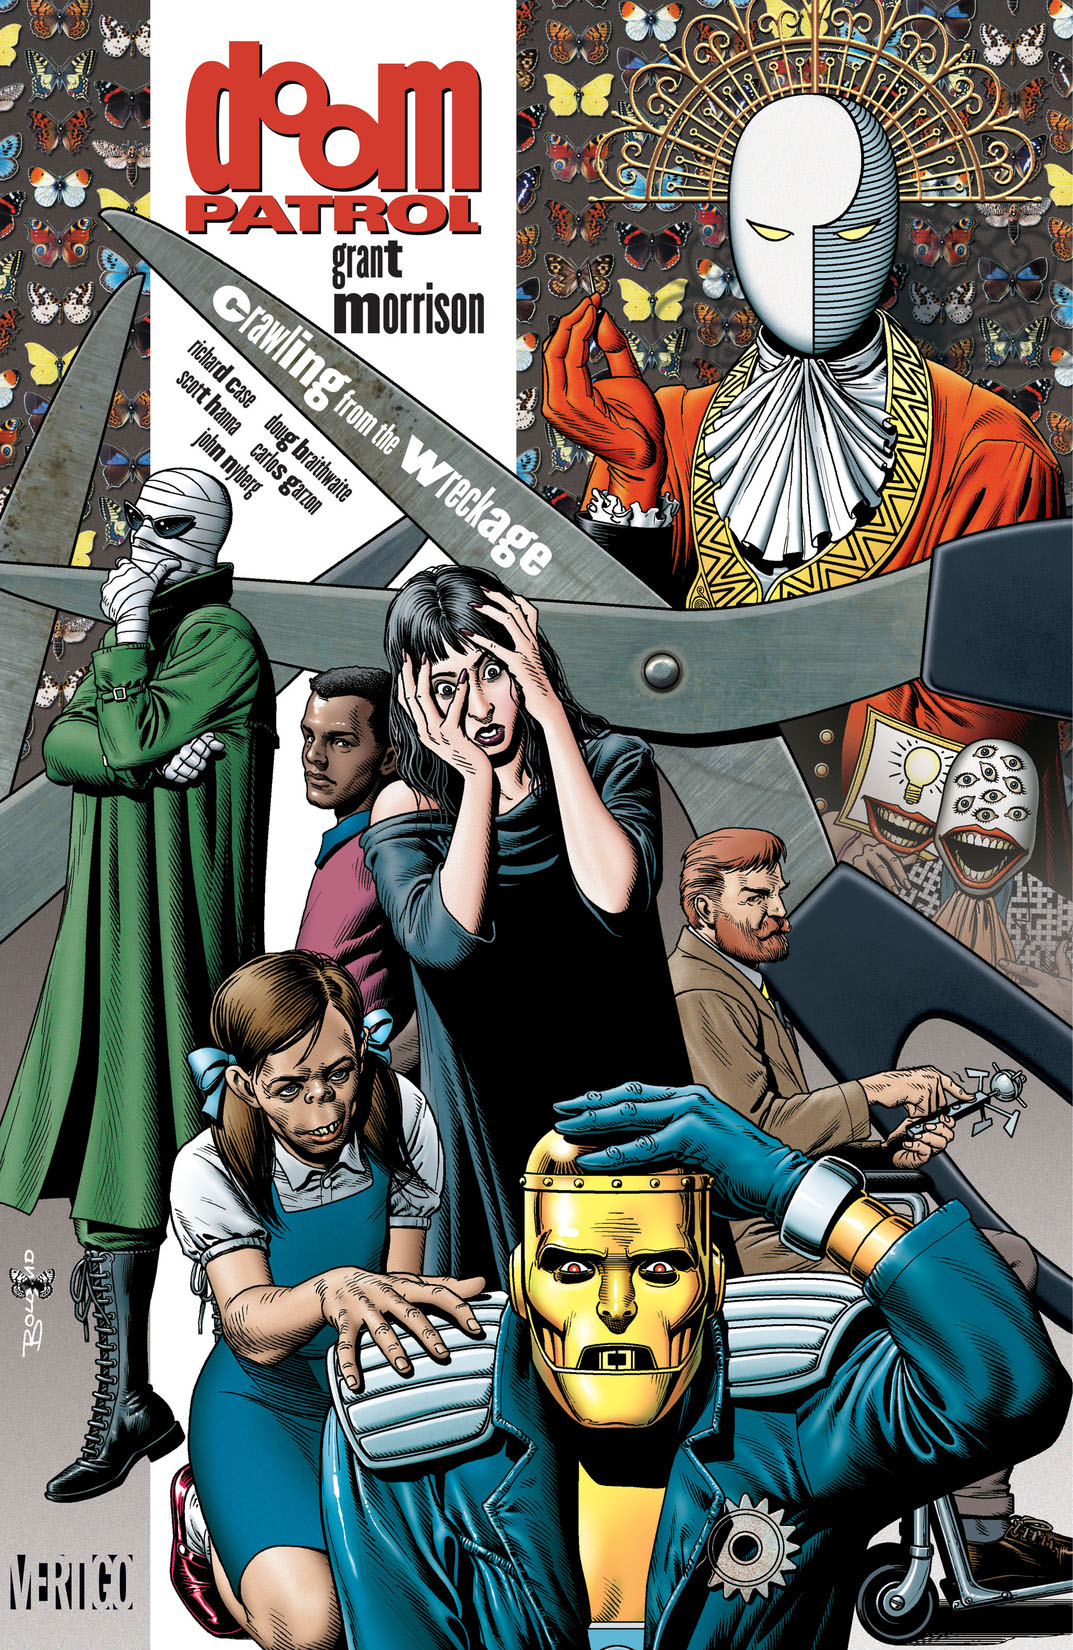 Doom Patrol Vol. 1: Crawling from the Wreckage preview images